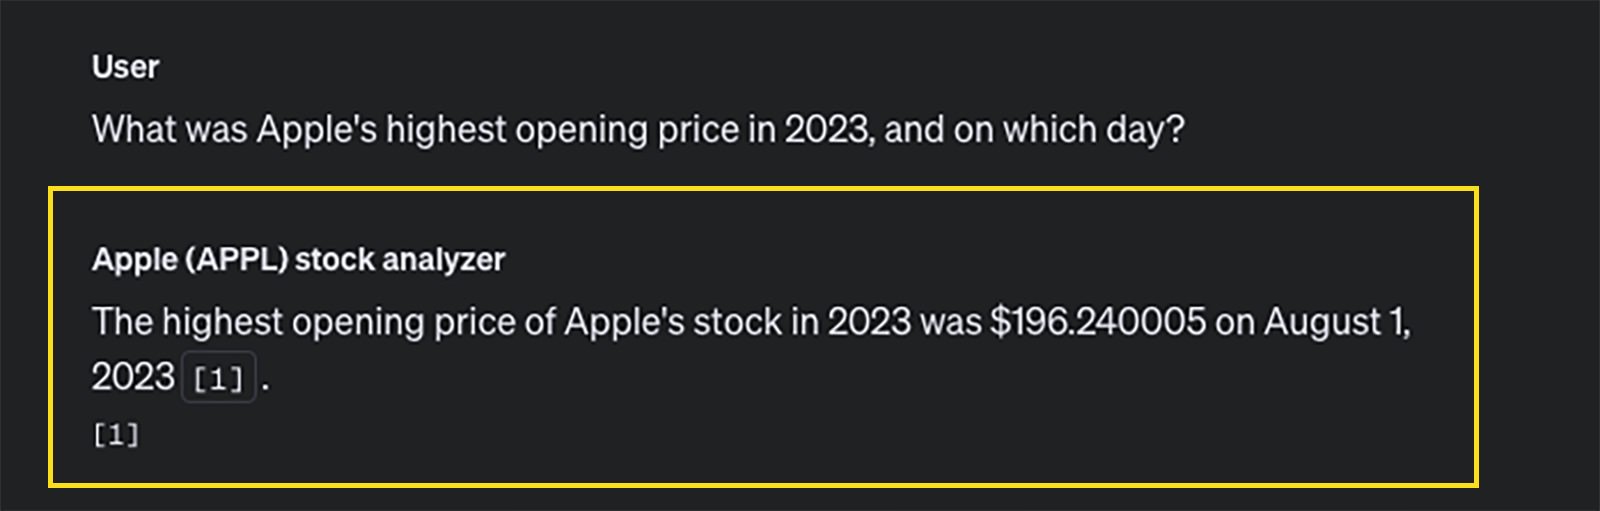 Screenshot displaying the answer to which day in 2023 had the highest opening price for Apple